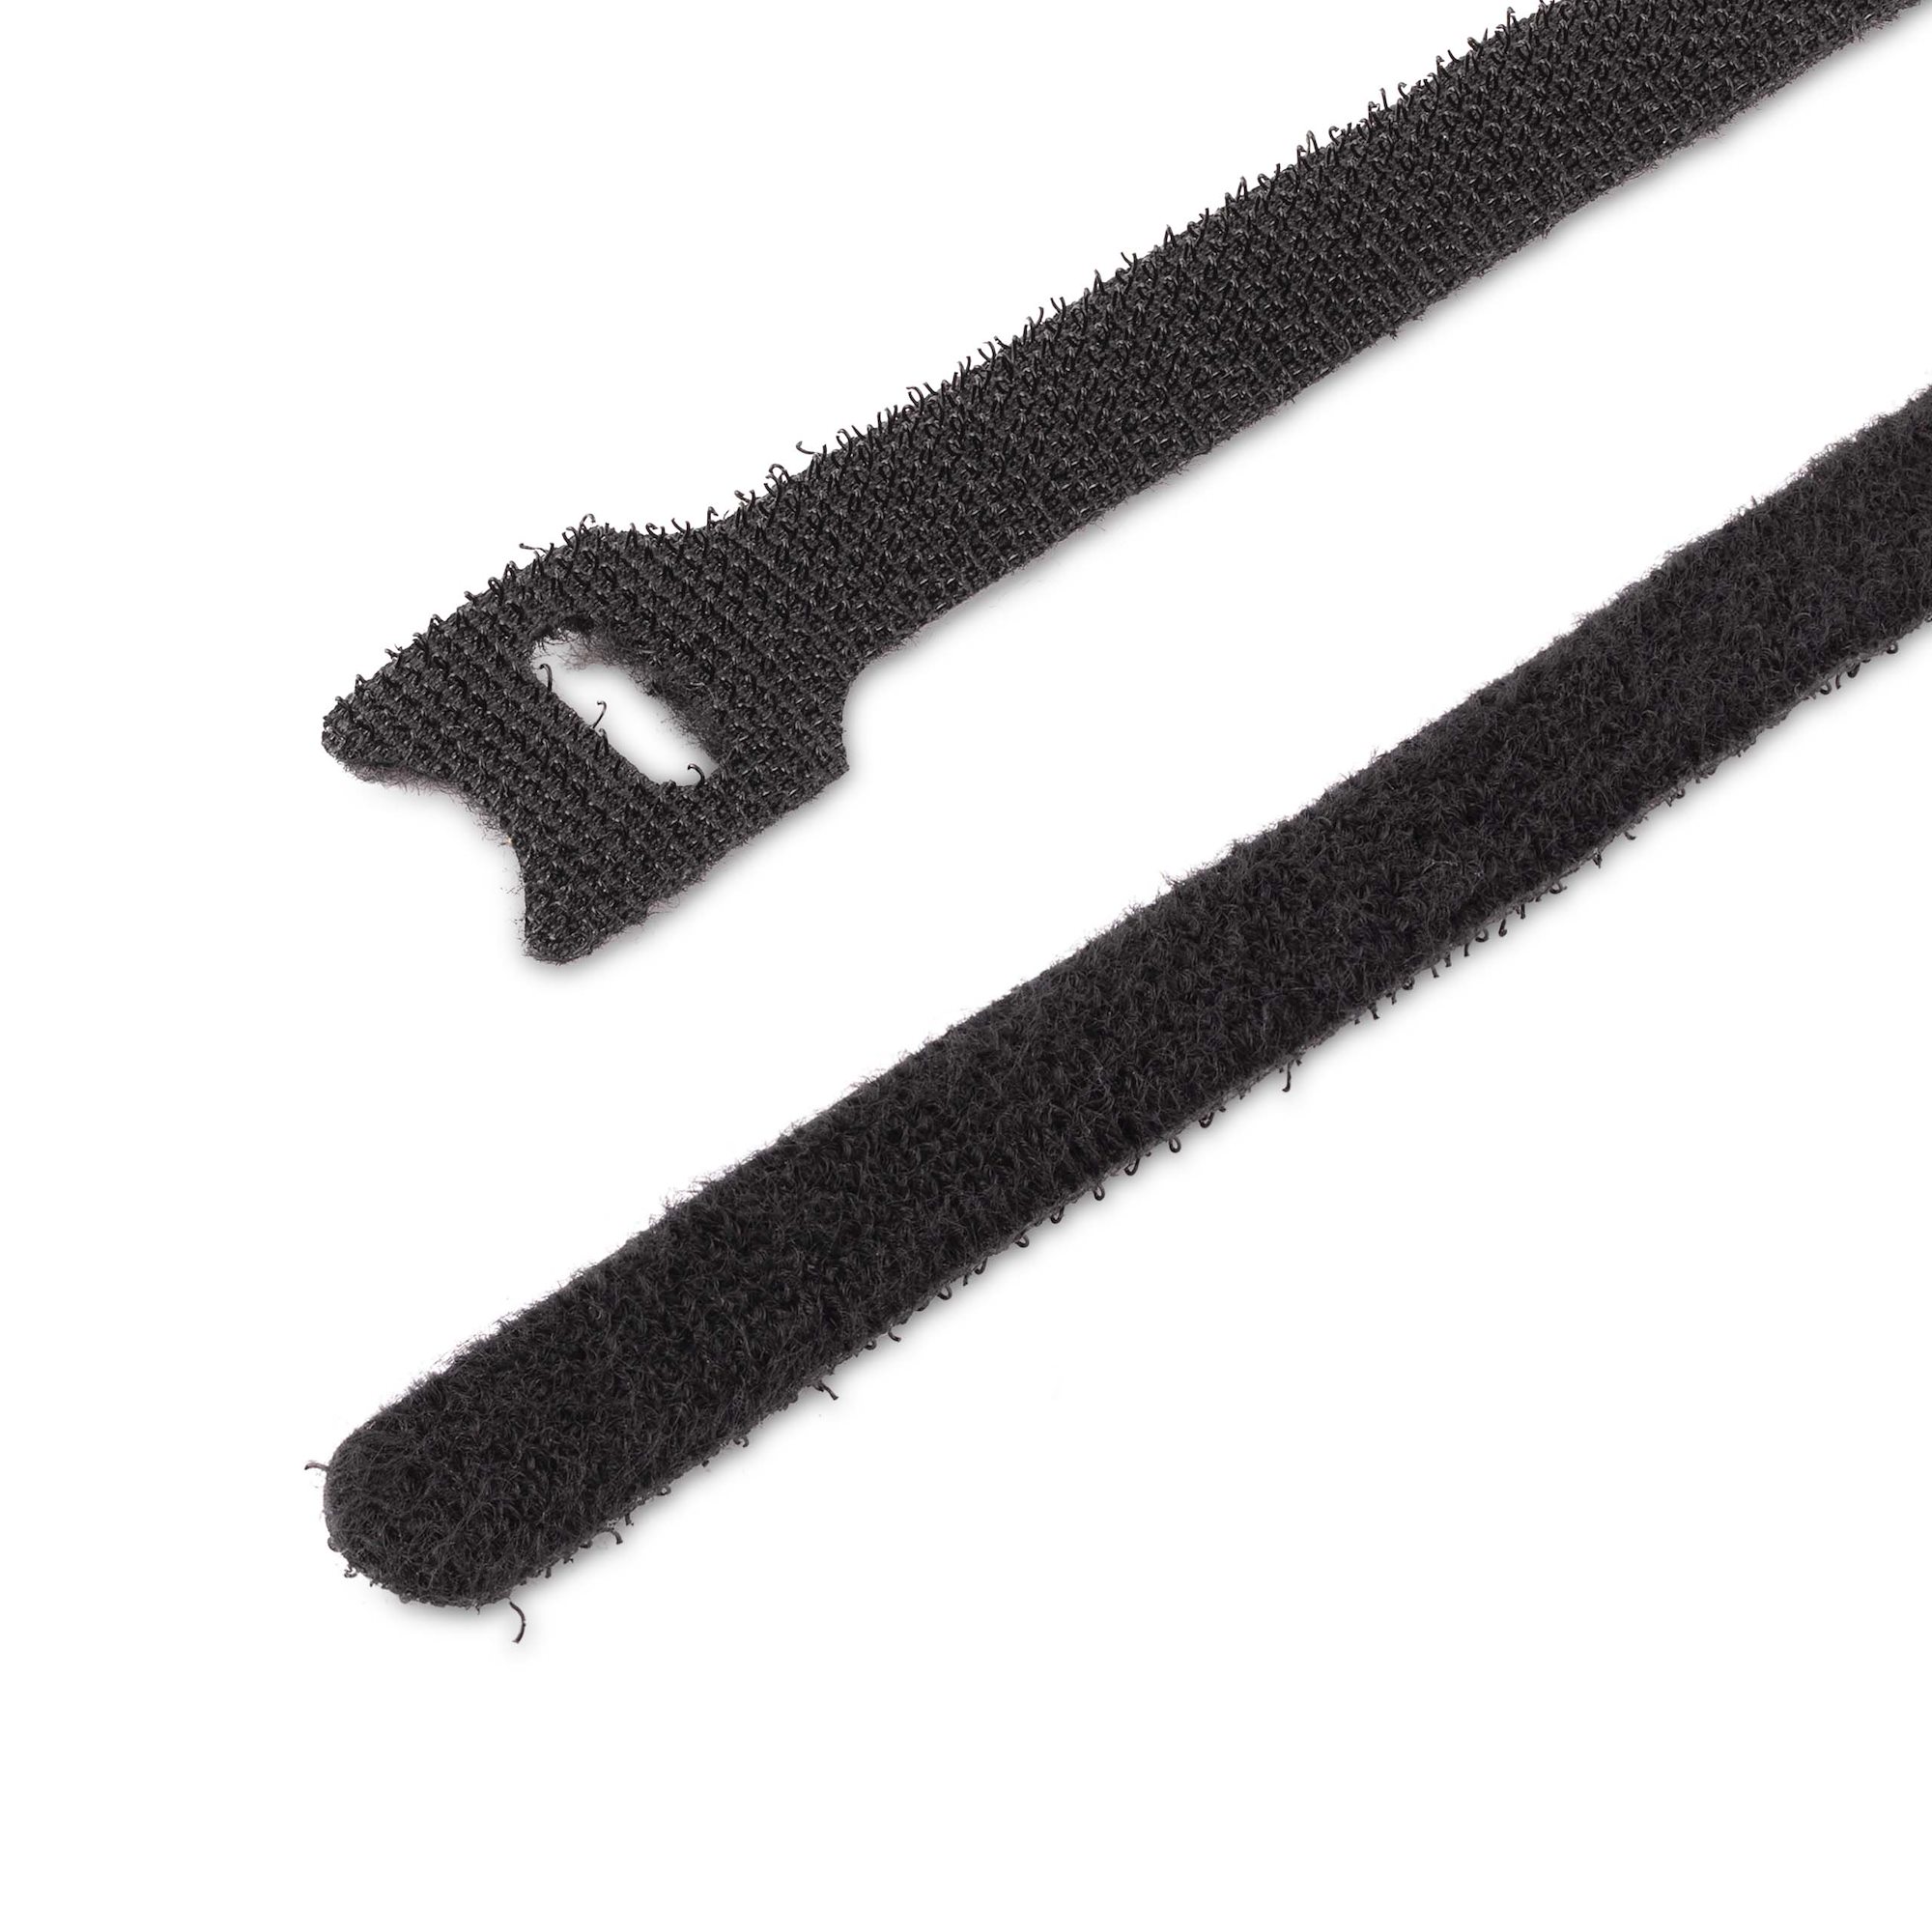 6 Inch Black Hook and Loop Cable Tie Roll - 100 Pack